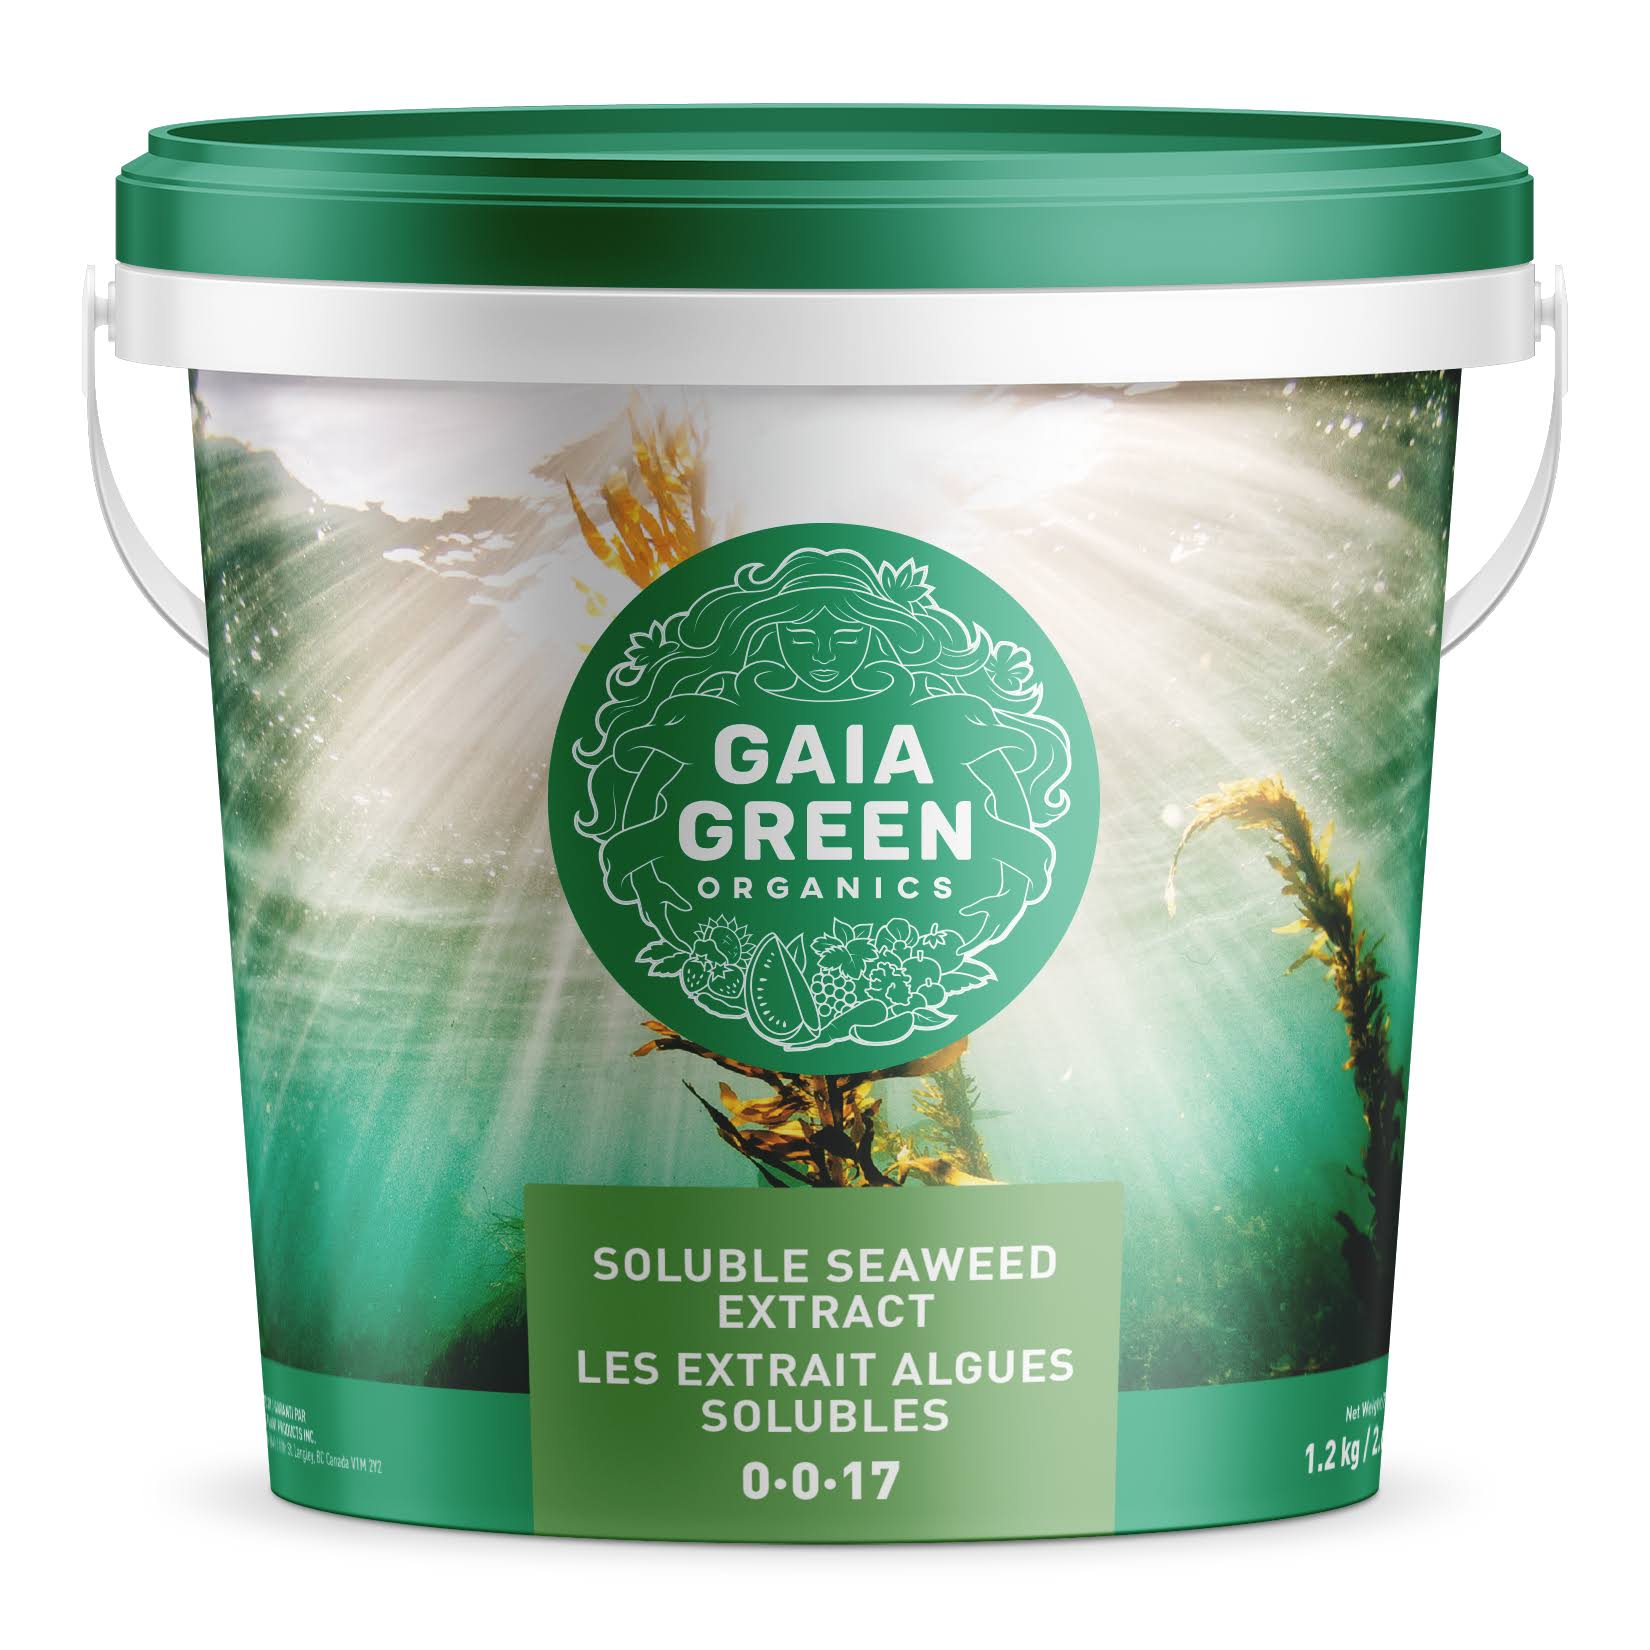 Gaia Green Soluble Seaweed Extract - 1.2 kg